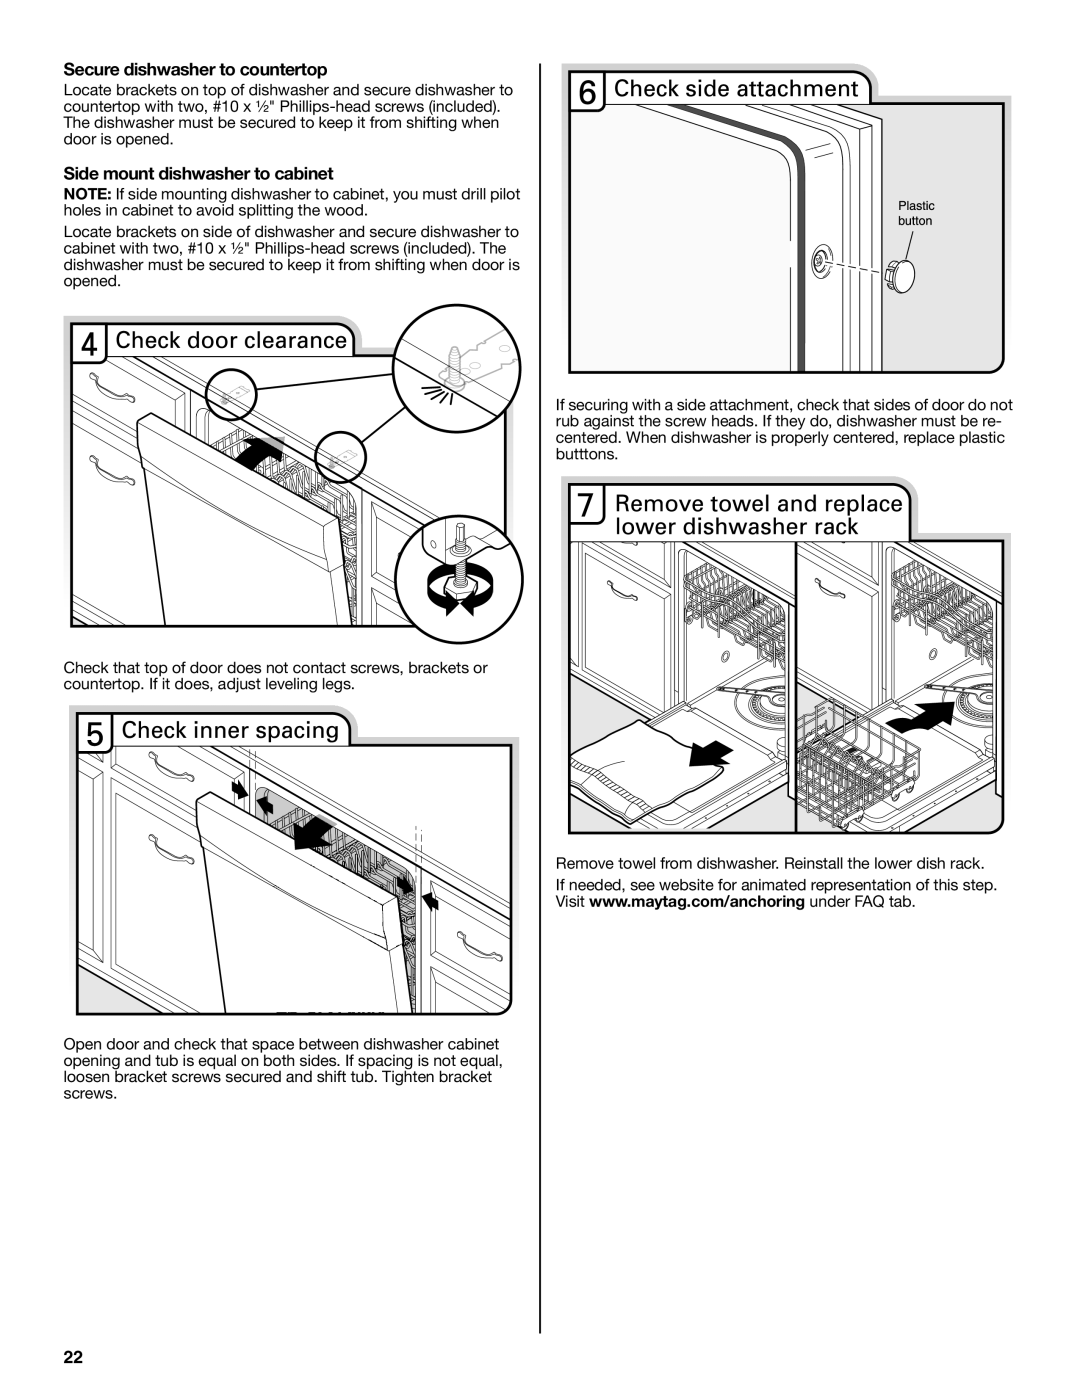 Maytag W10532762A installation instructions Secure dishwasher to countertop, Side mount dishwasher to cabinet 